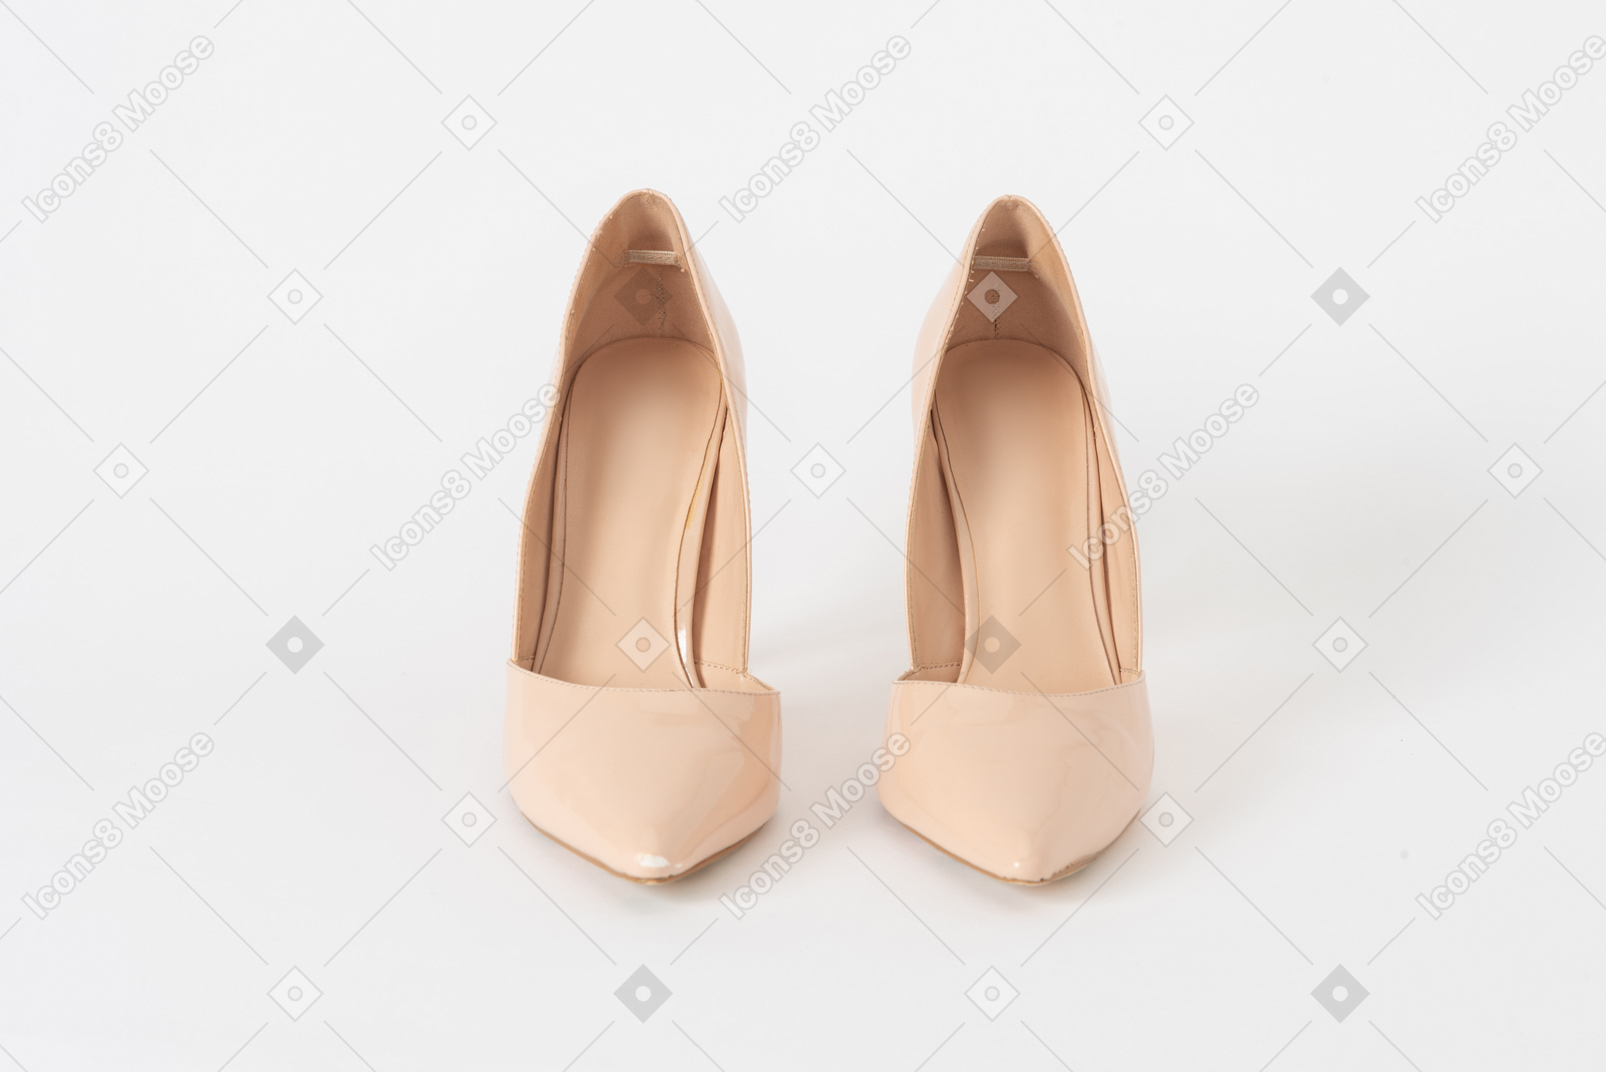 A front shot of a pair of beige lacquered stiletto shoes